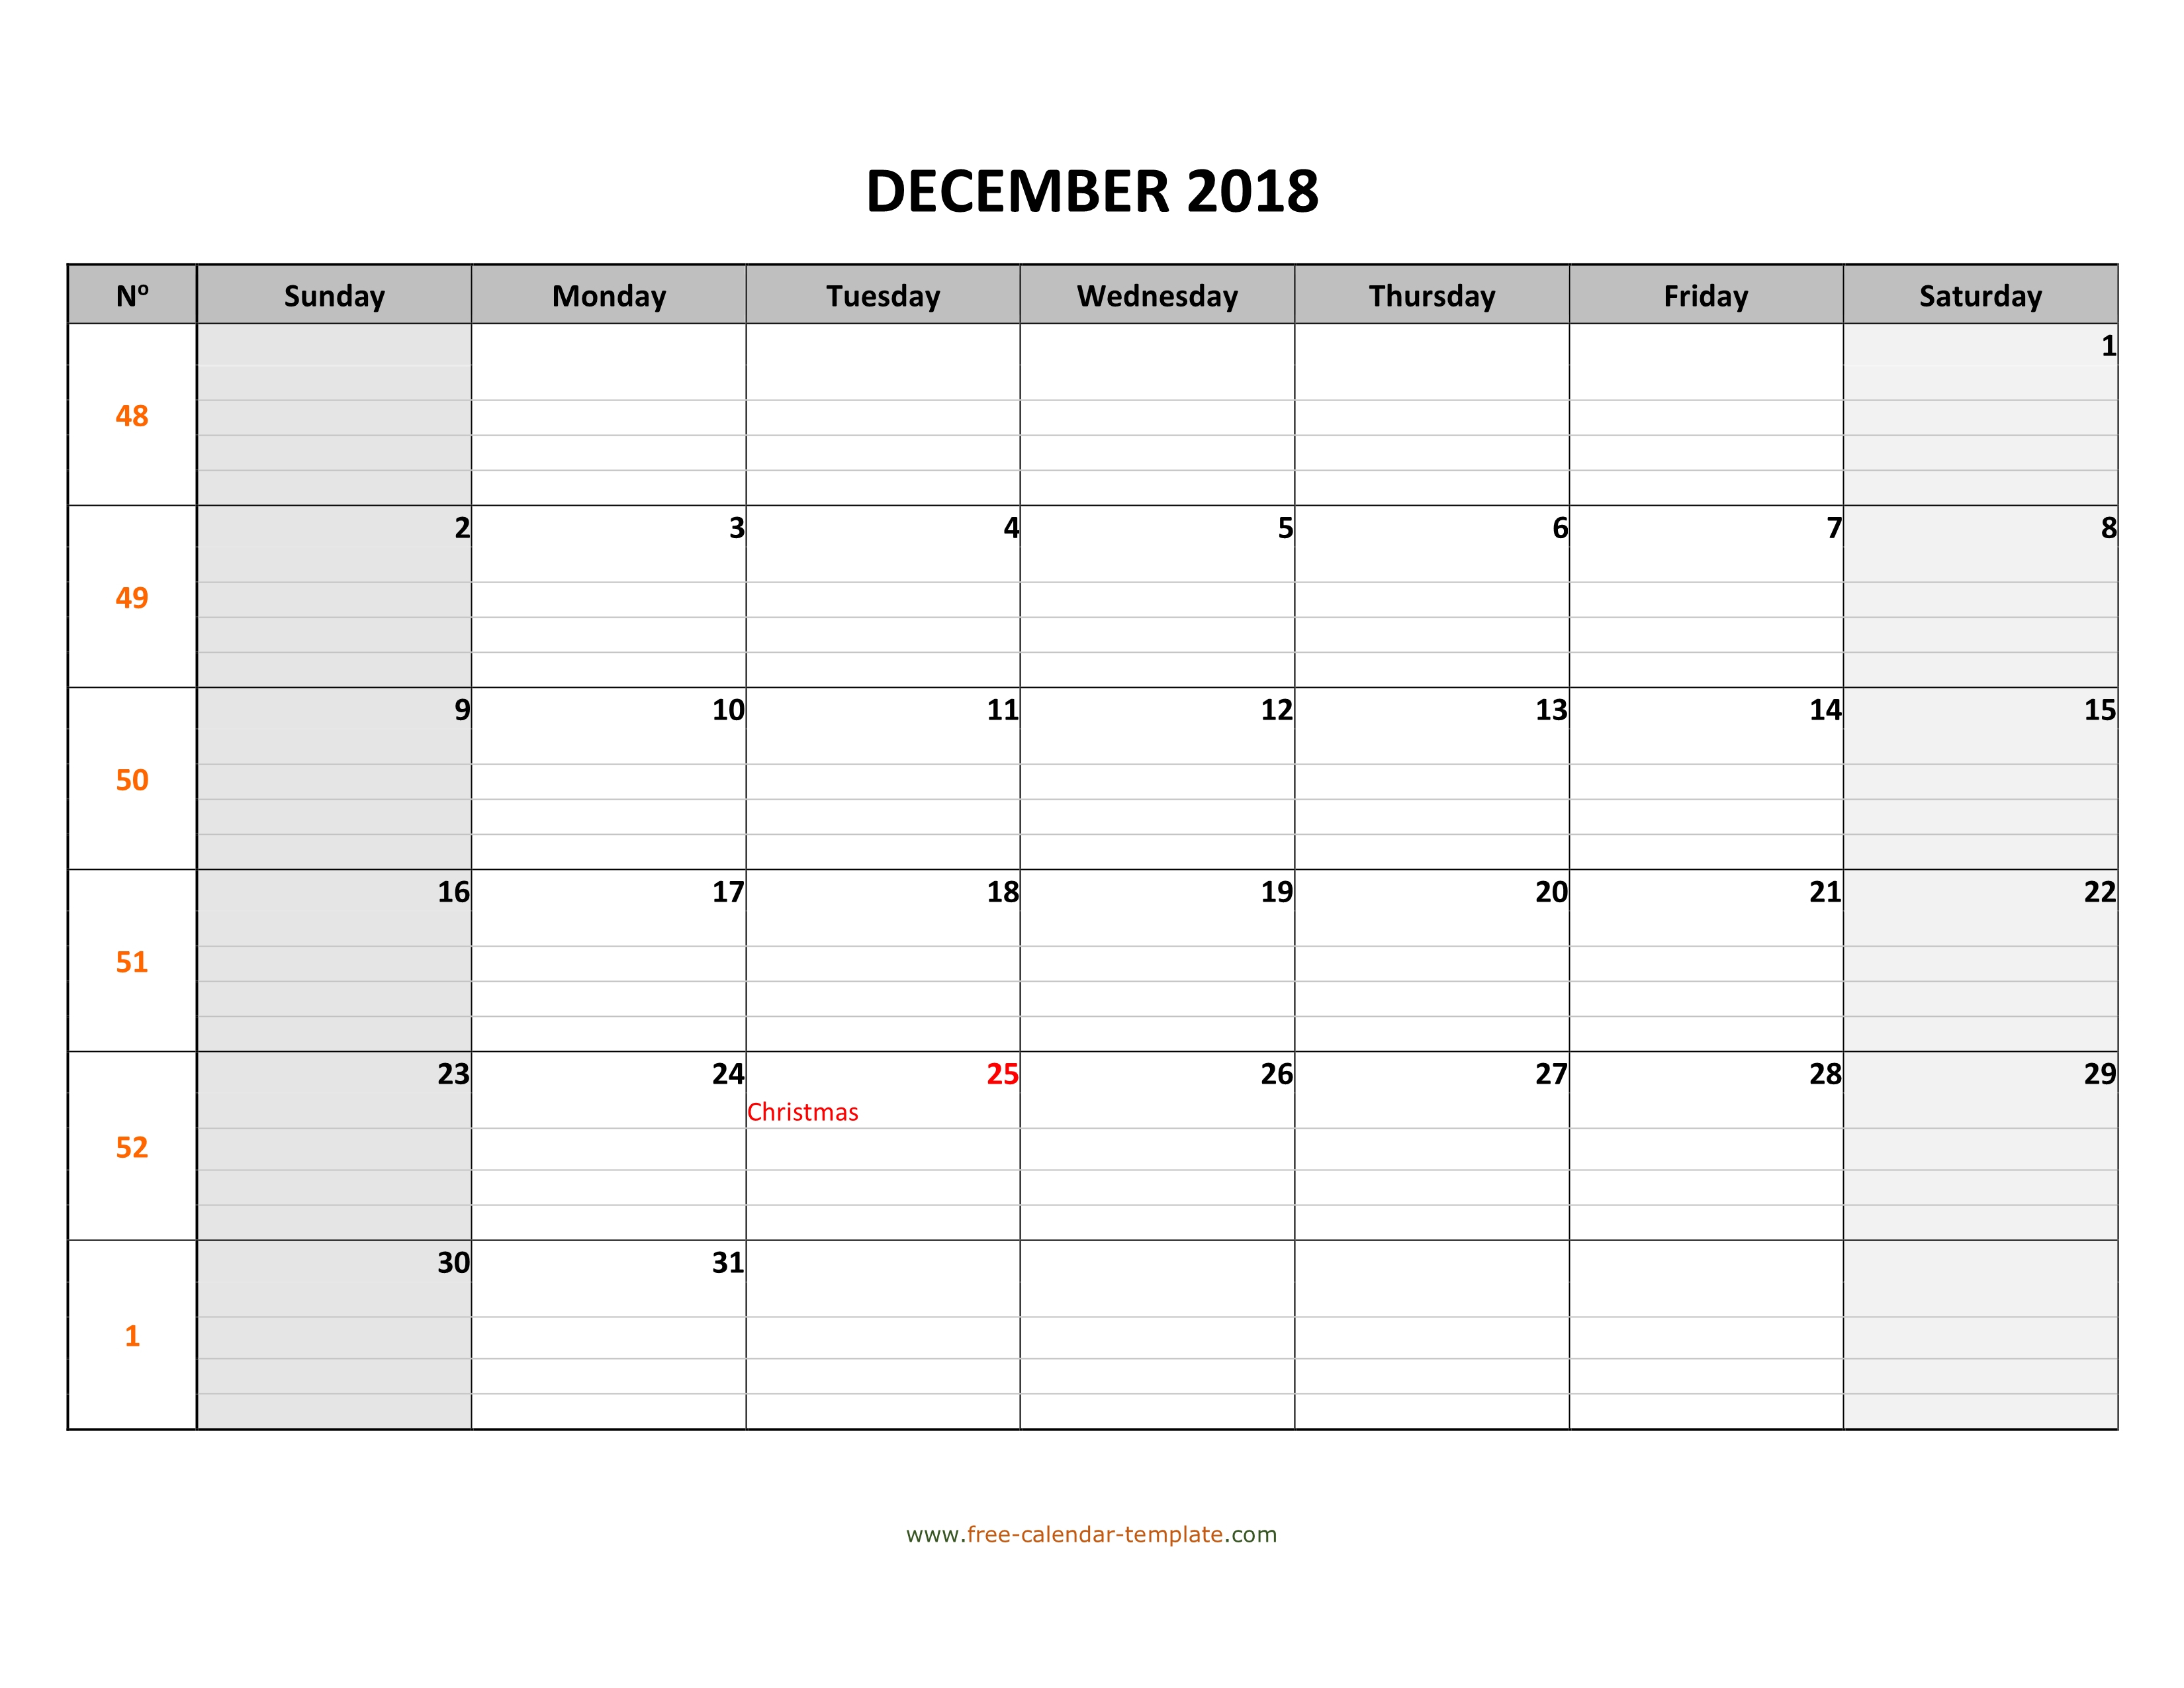 December 2018 Calendar Free Printable With Grid Lines throughout Calendar Template With Lines